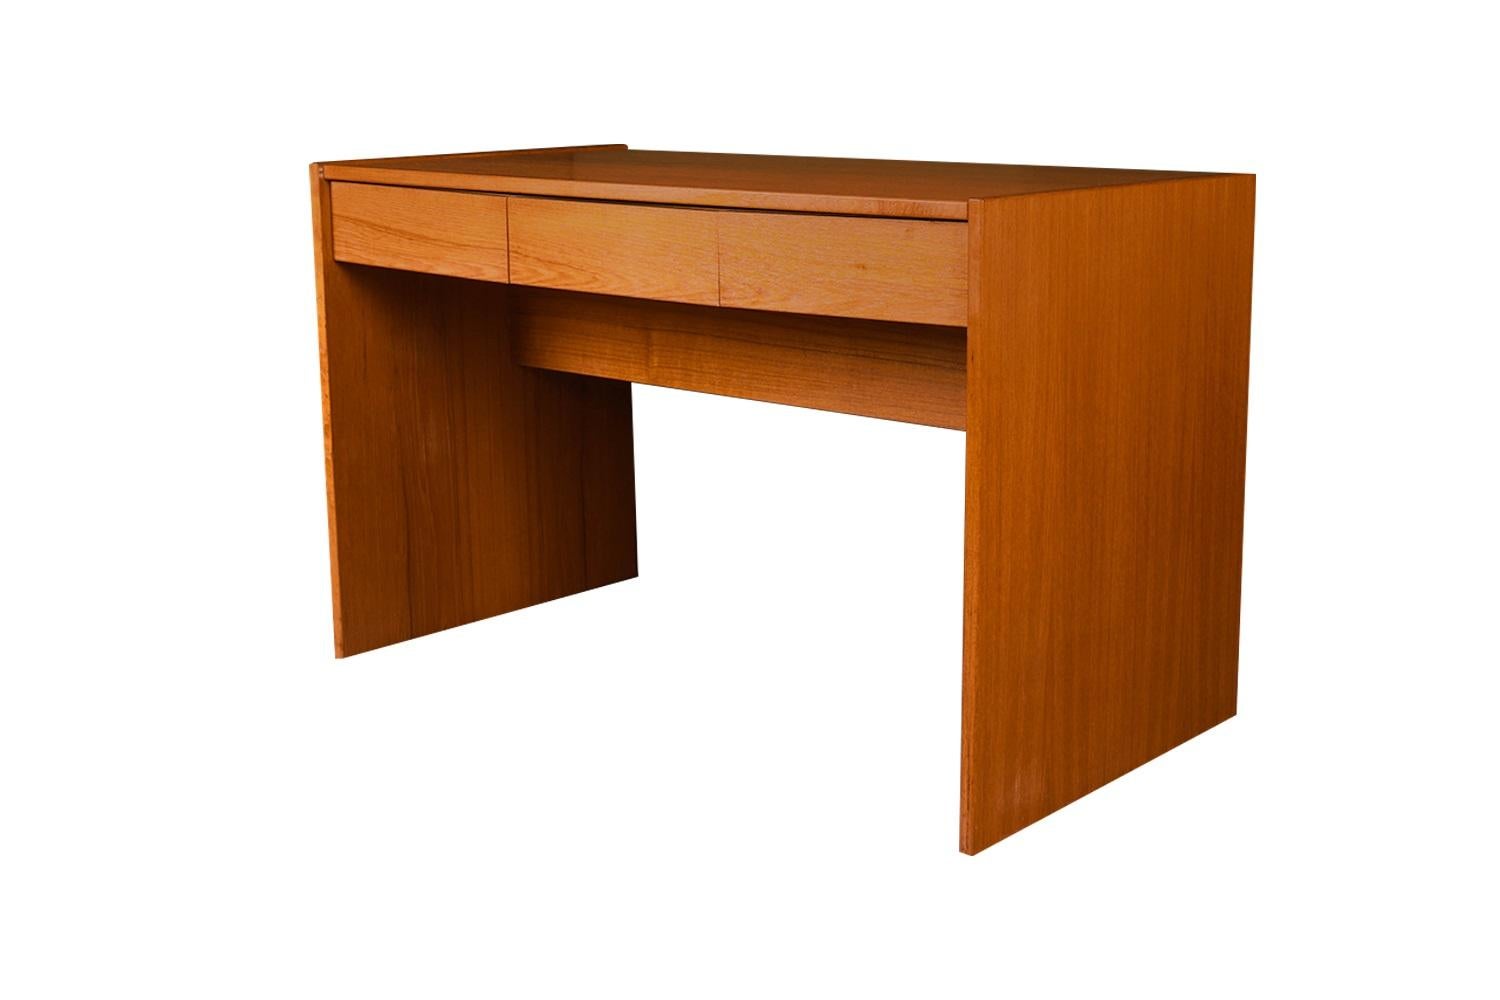 A desk with incredible form and presence. This attractive original Danish Modern desk by Nordisk Andels-Eksport made in Denmark, features a rectangle frame with sliding top surface above three drawers. This movable top glides smoothly from back to